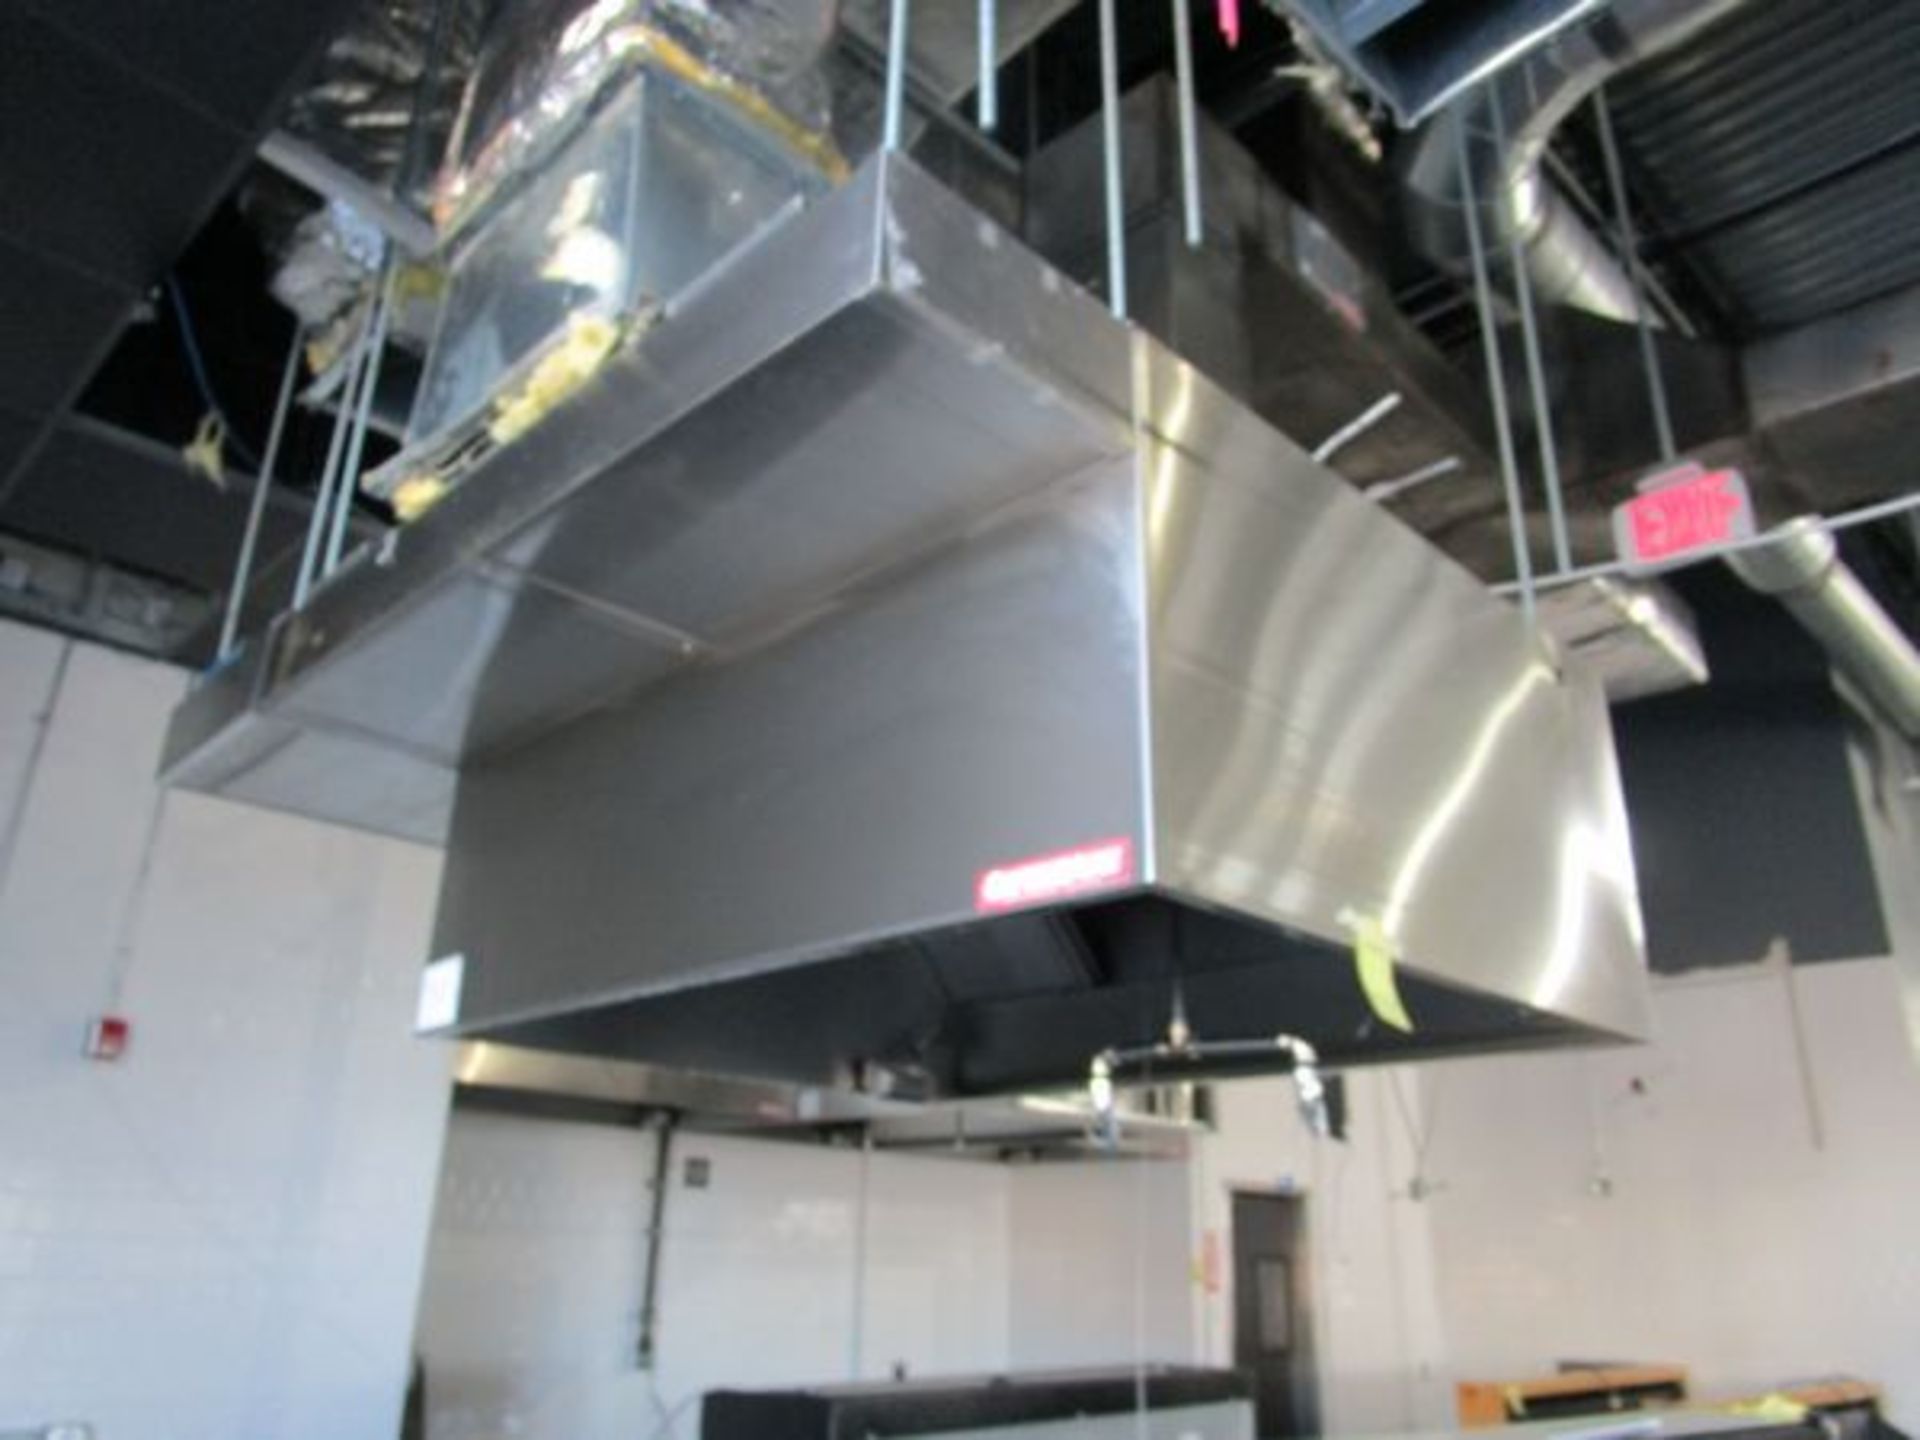 Captive Aire Exhaust Hoods, Approx. 4'x5' Each w/ Fire System, Hood Only, No Exhaust Blower - Image 3 of 4